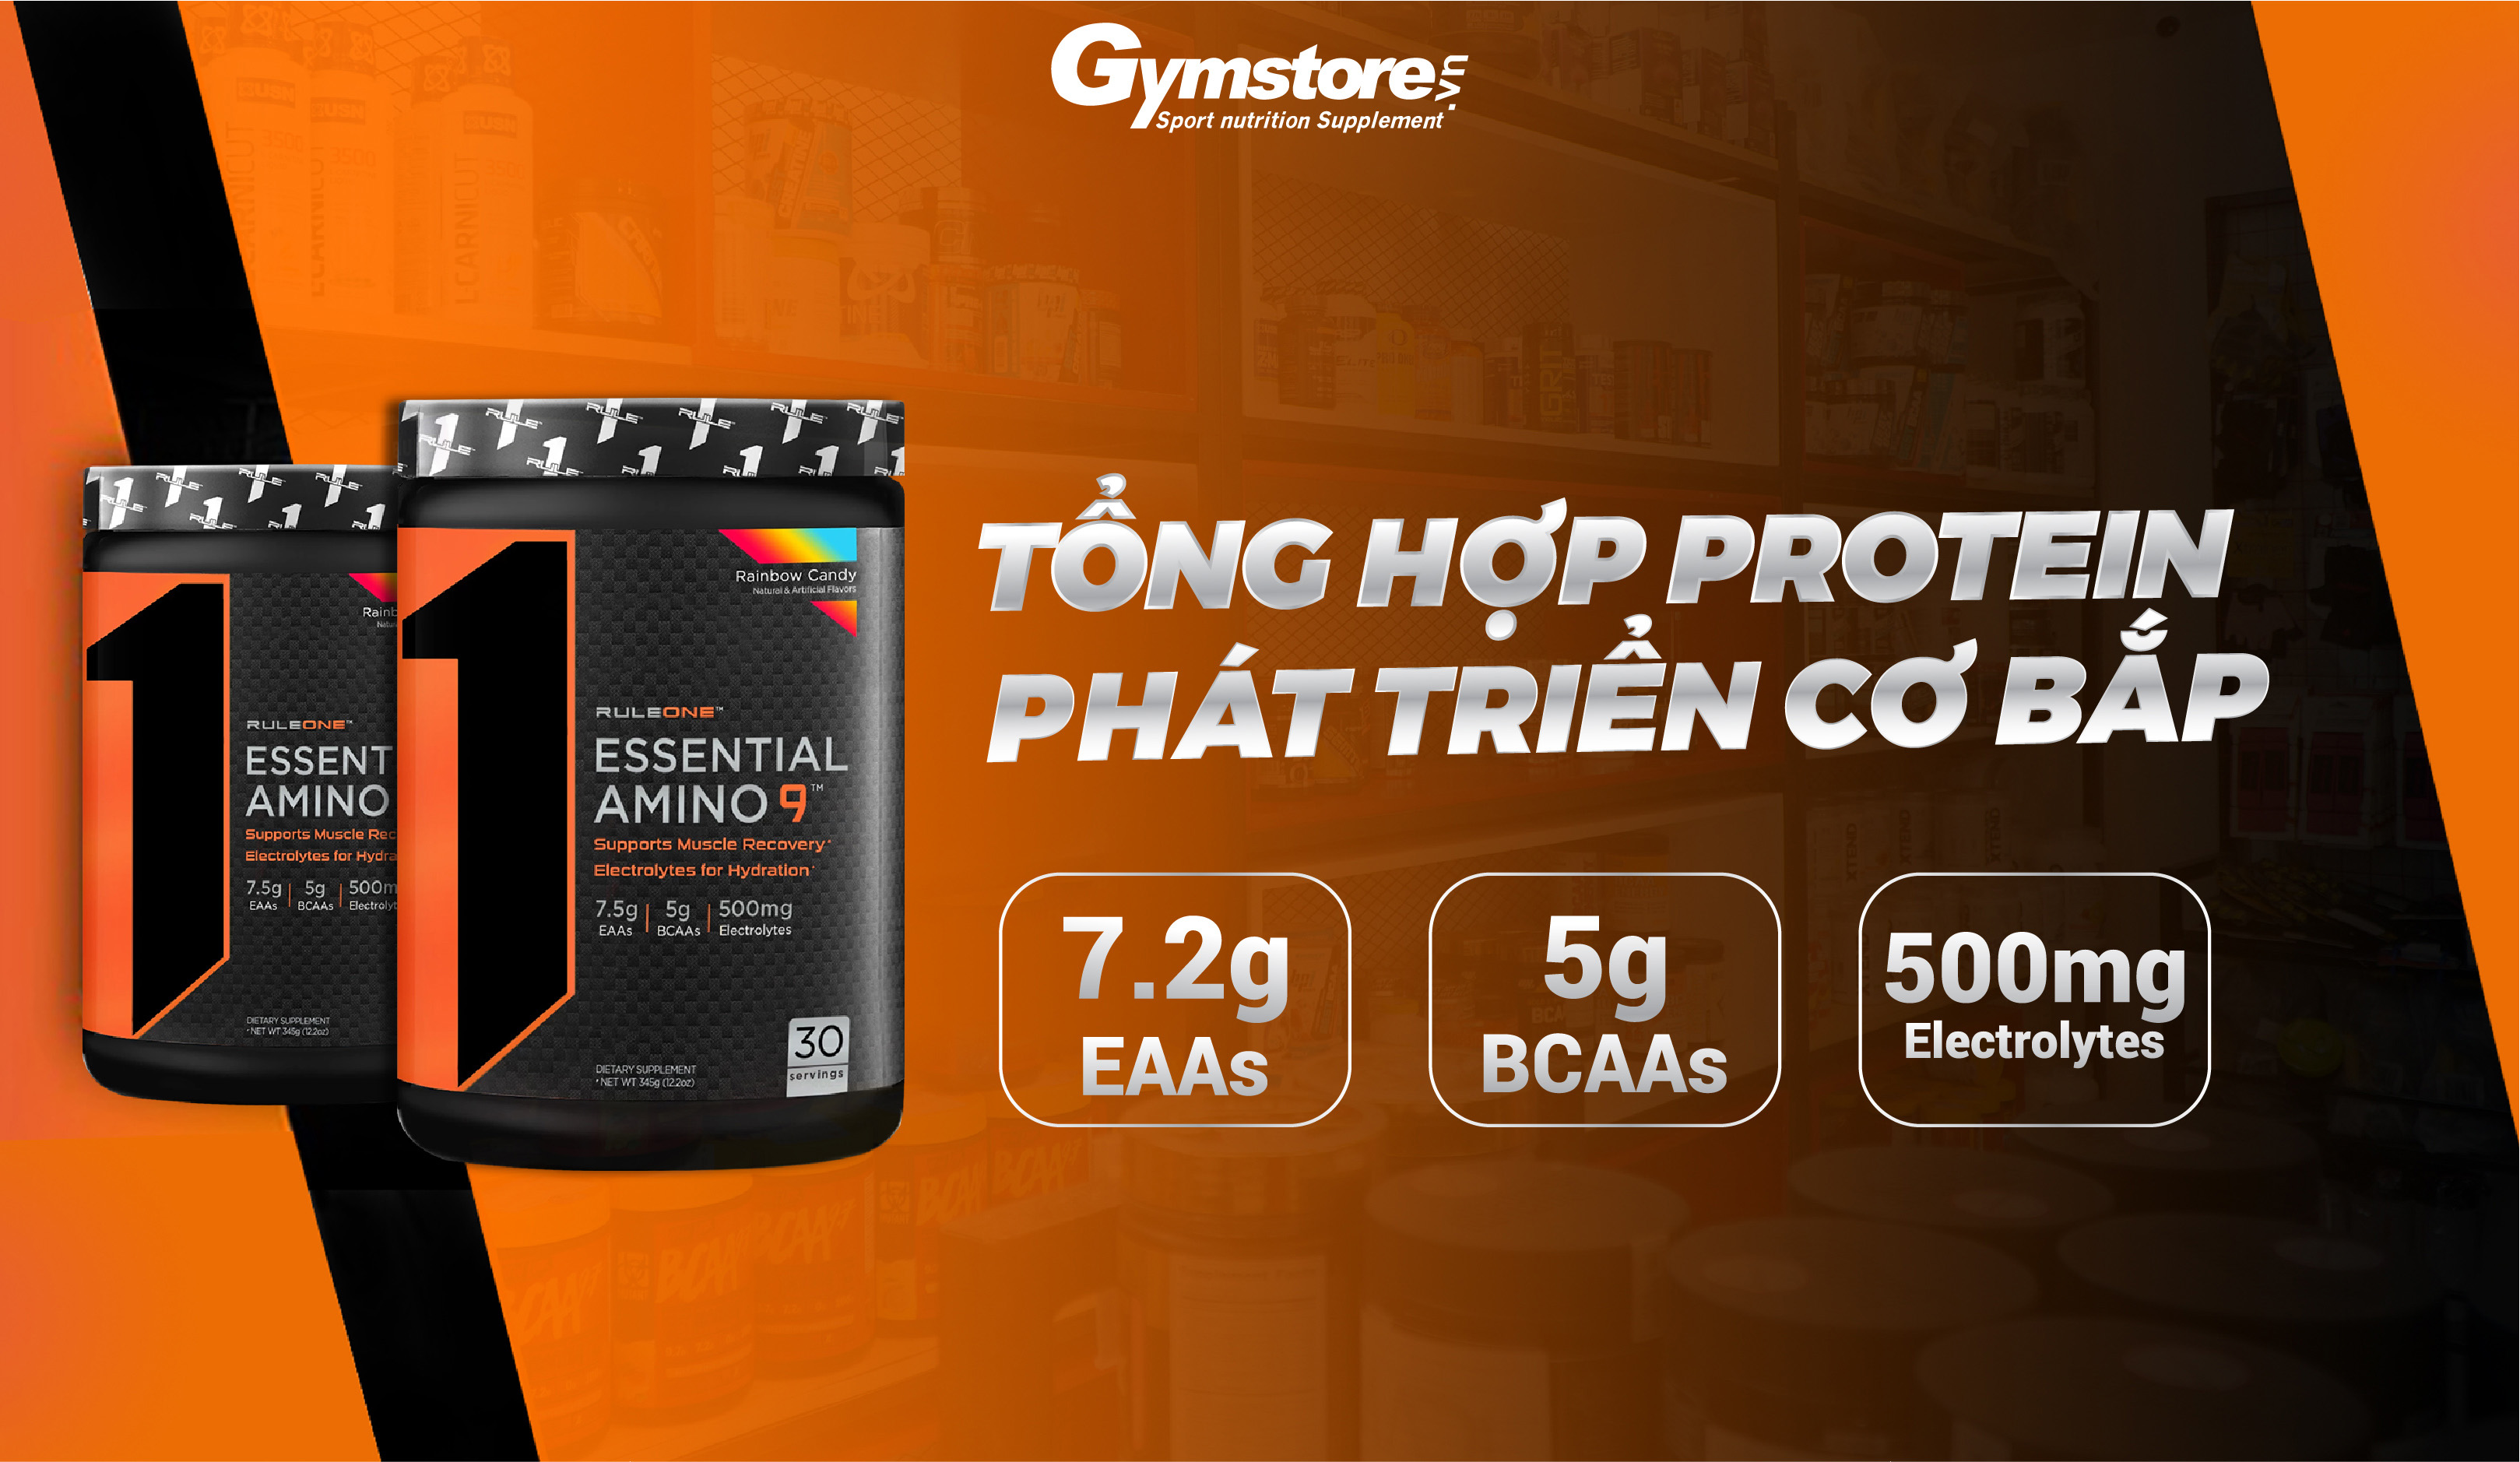 Rule1-eaa-tong-hop-protein-phat-trien-co-bap-gymstore